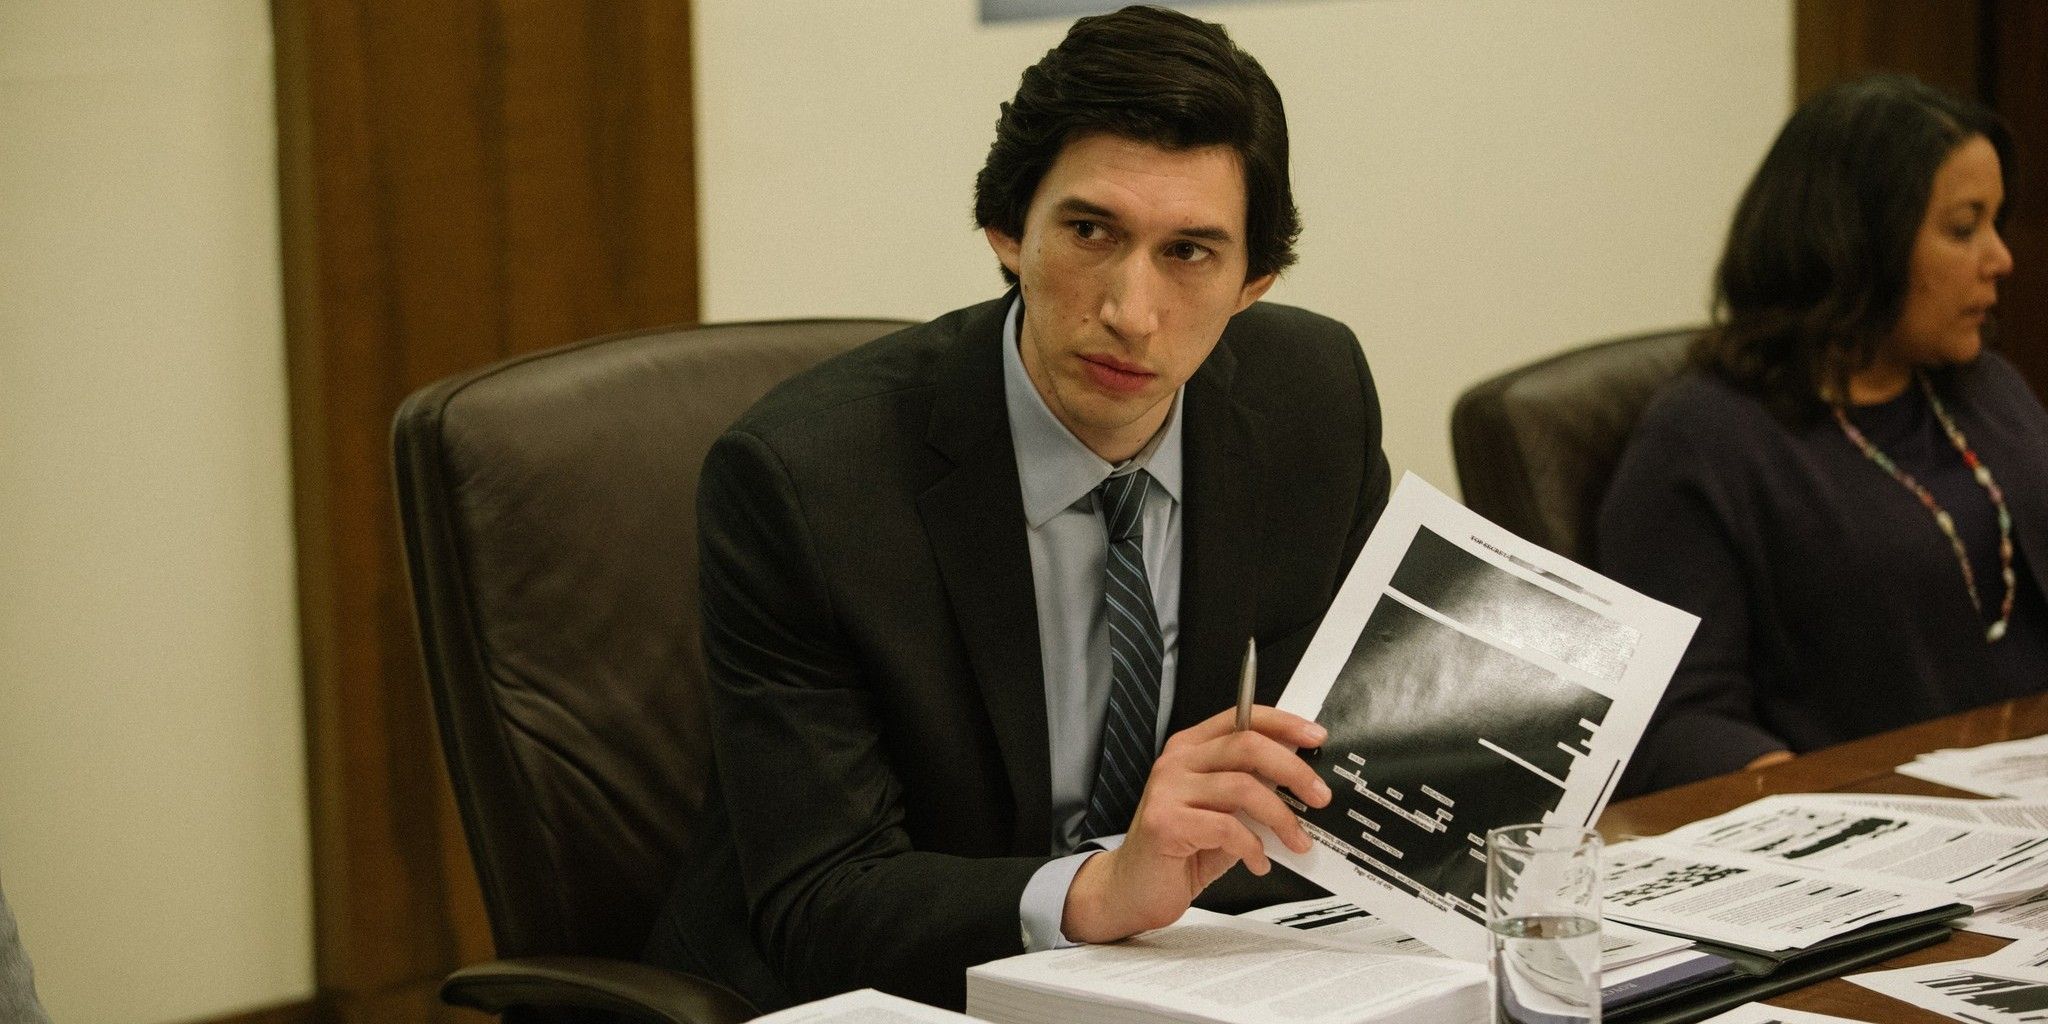 Adam Driver holding a censored page from a government document in a still from The Report